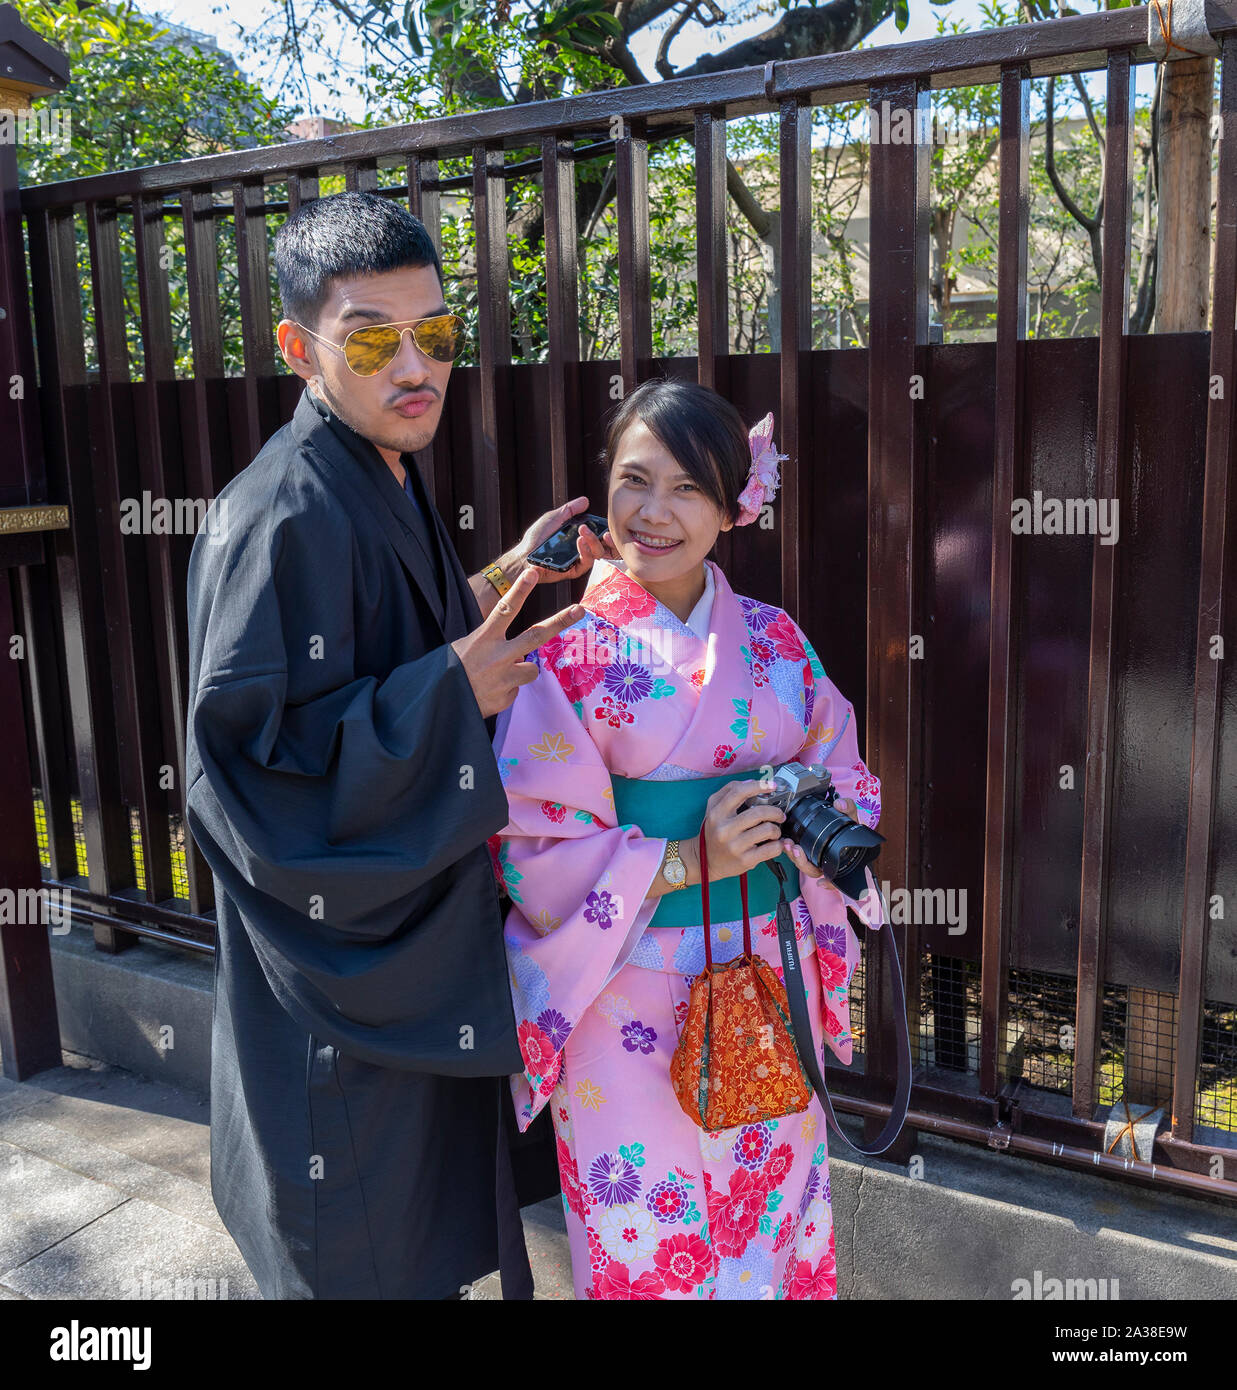 Tokyo, Japan - october 30th, 2018: A young couple in traditional clothes on their way to the Senso - Ji temple in Tokyo, Japan Stock Photo